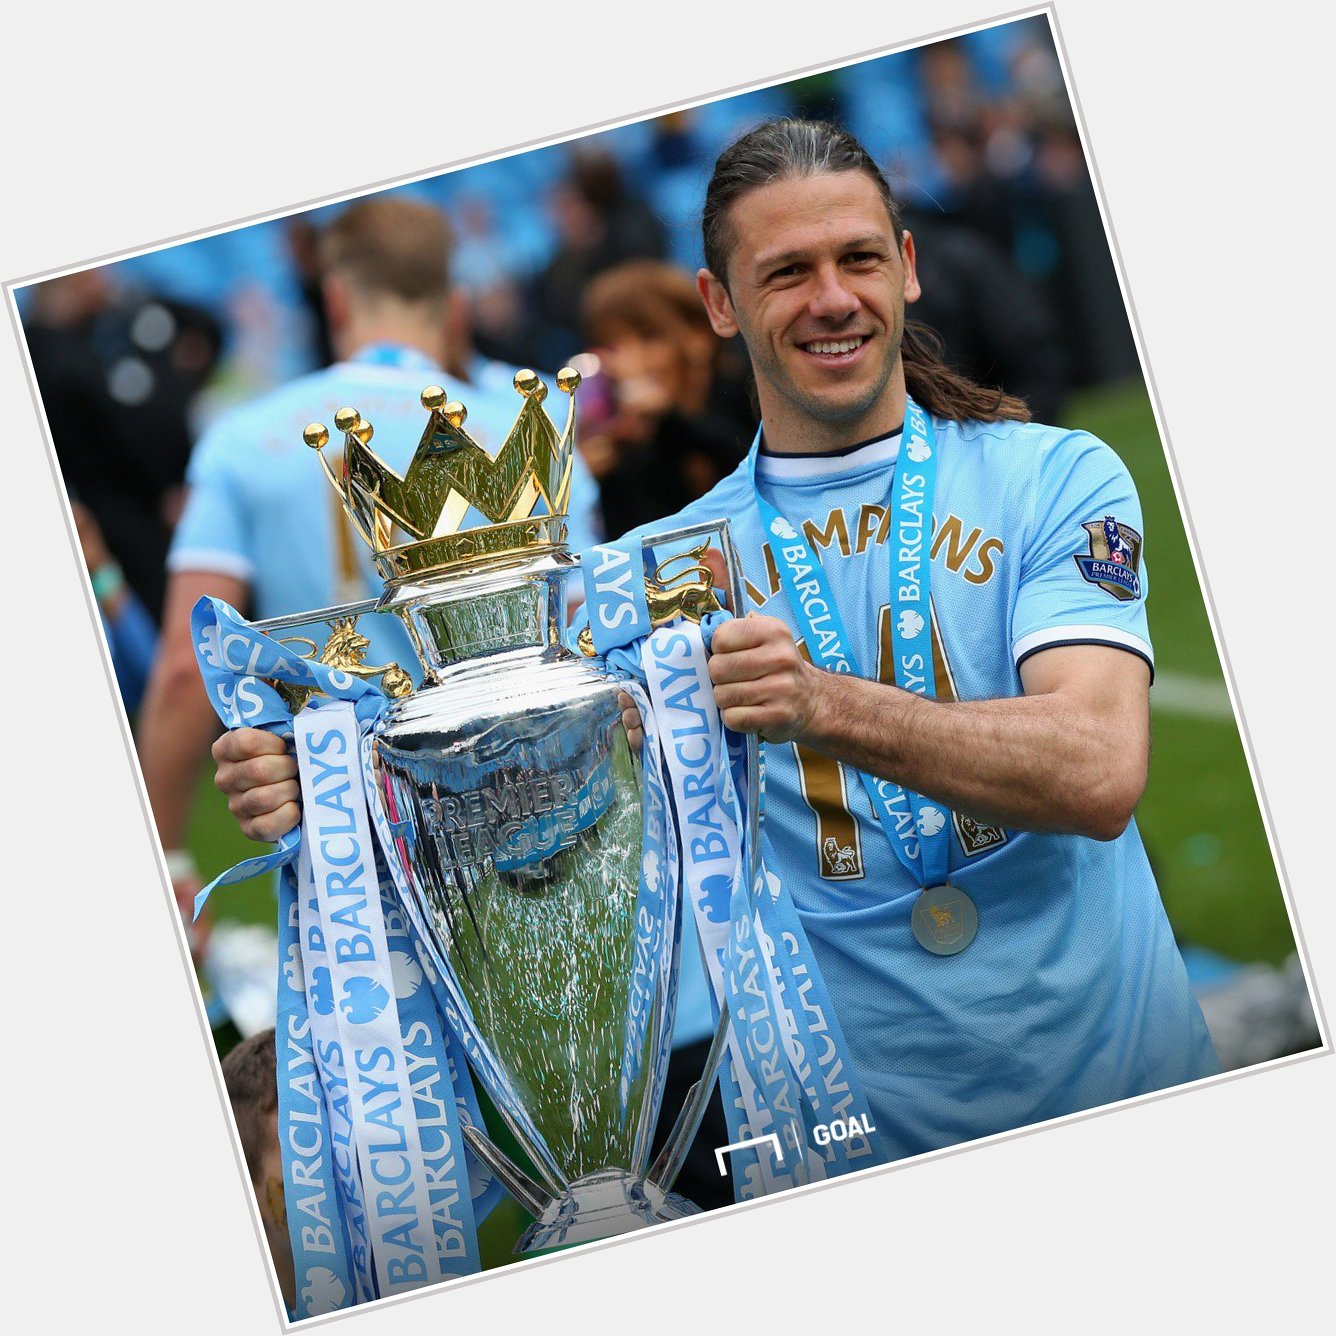 Happy Birthday, Martin Demichelis!  599 games  33 goals 16 trophies

Not a bad career at all     